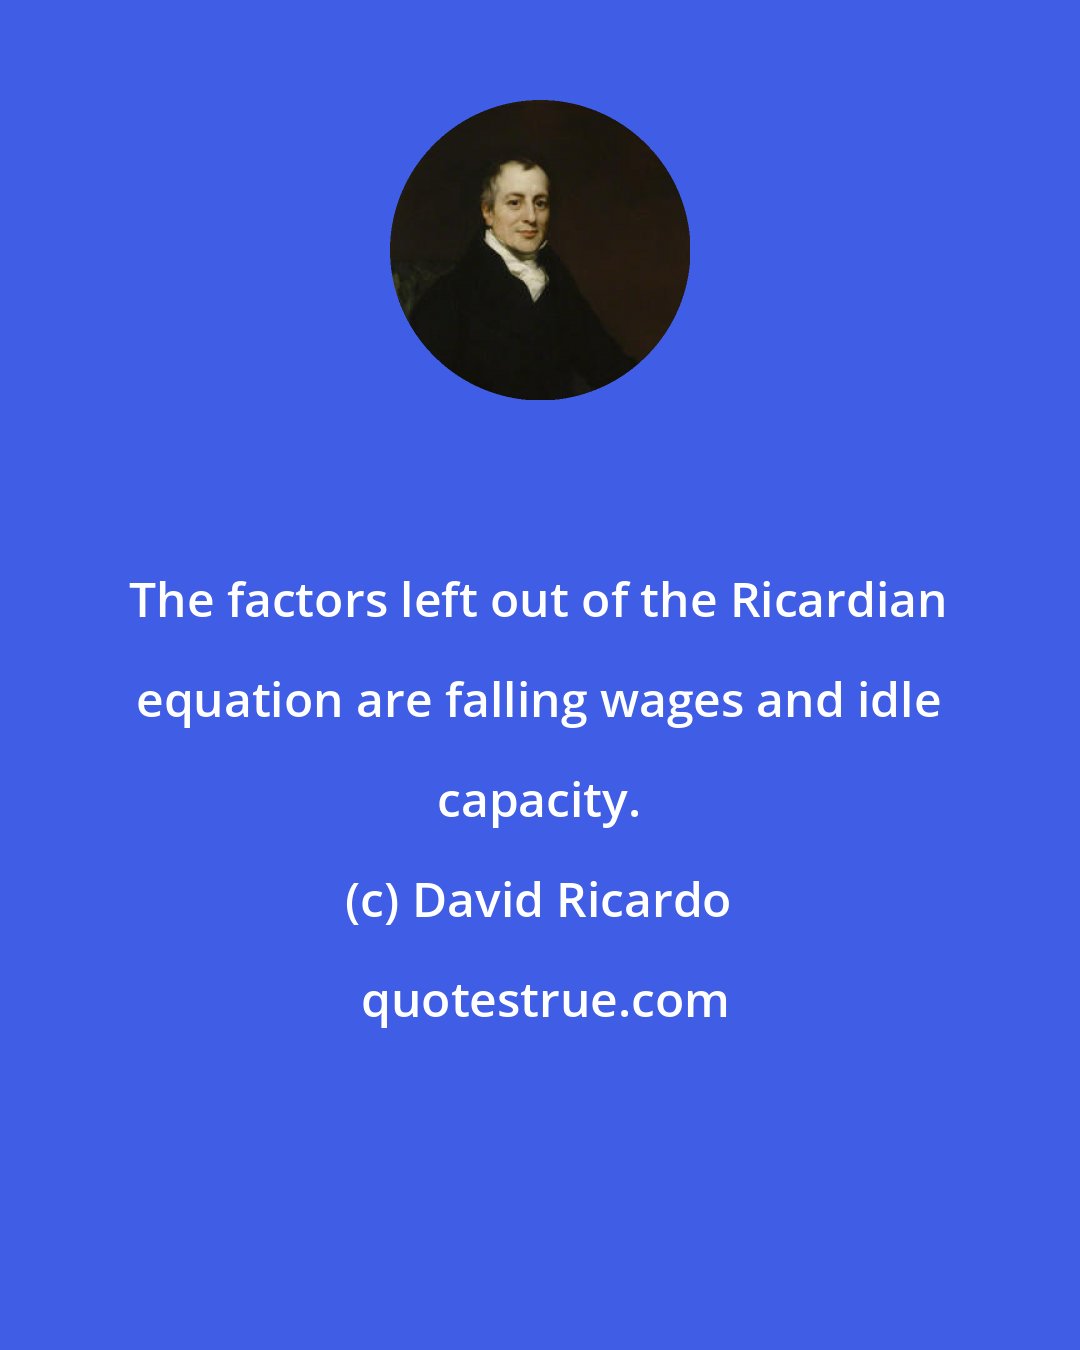 David Ricardo: The factors left out of the Ricardian equation are falling wages and idle capacity.